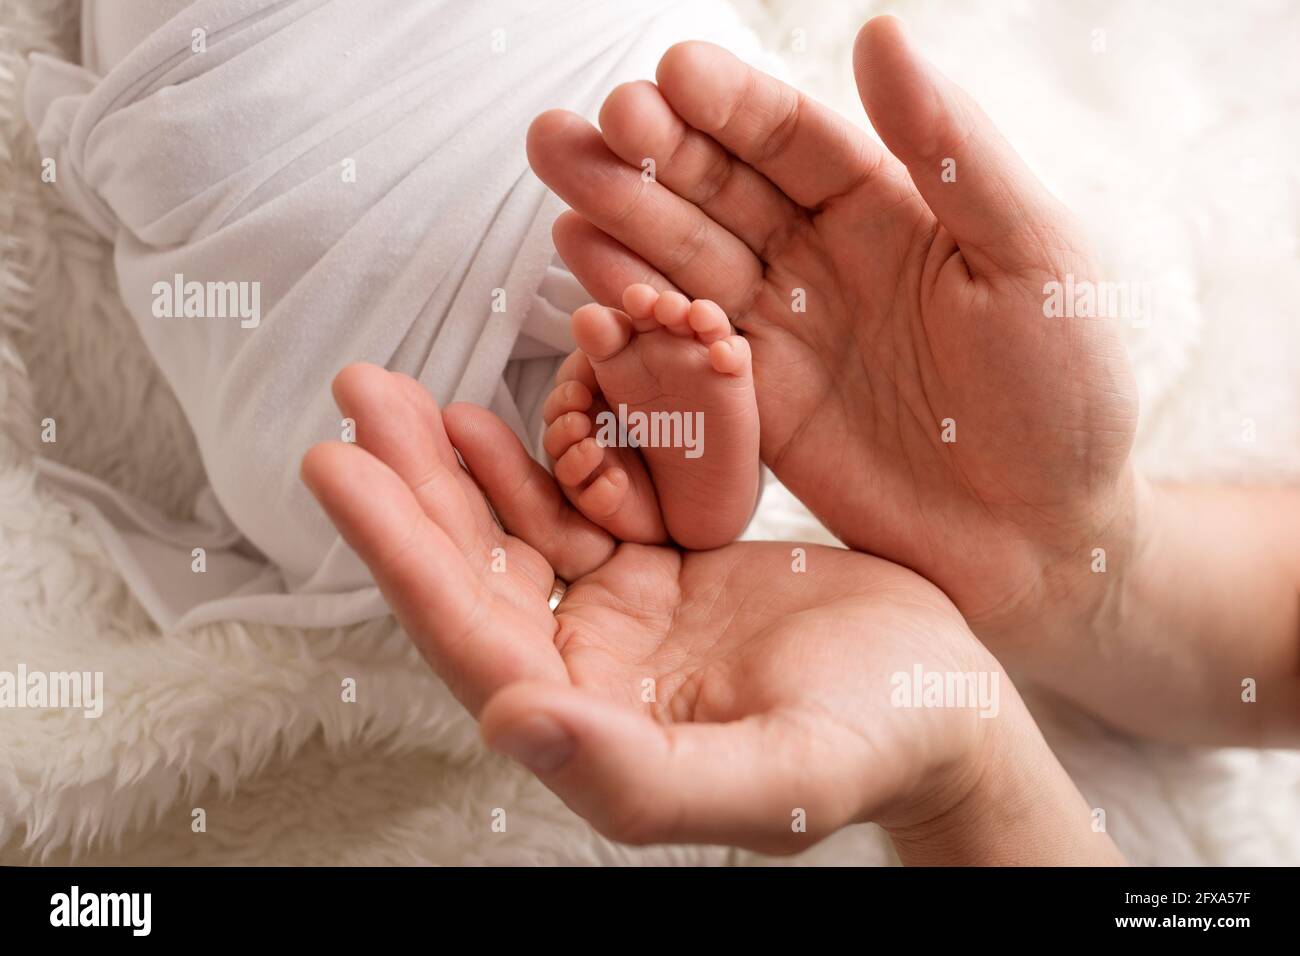 Children's feet in hold hands of mother and father. Mother, father and Child. Happy Family people concept. Stock Photo